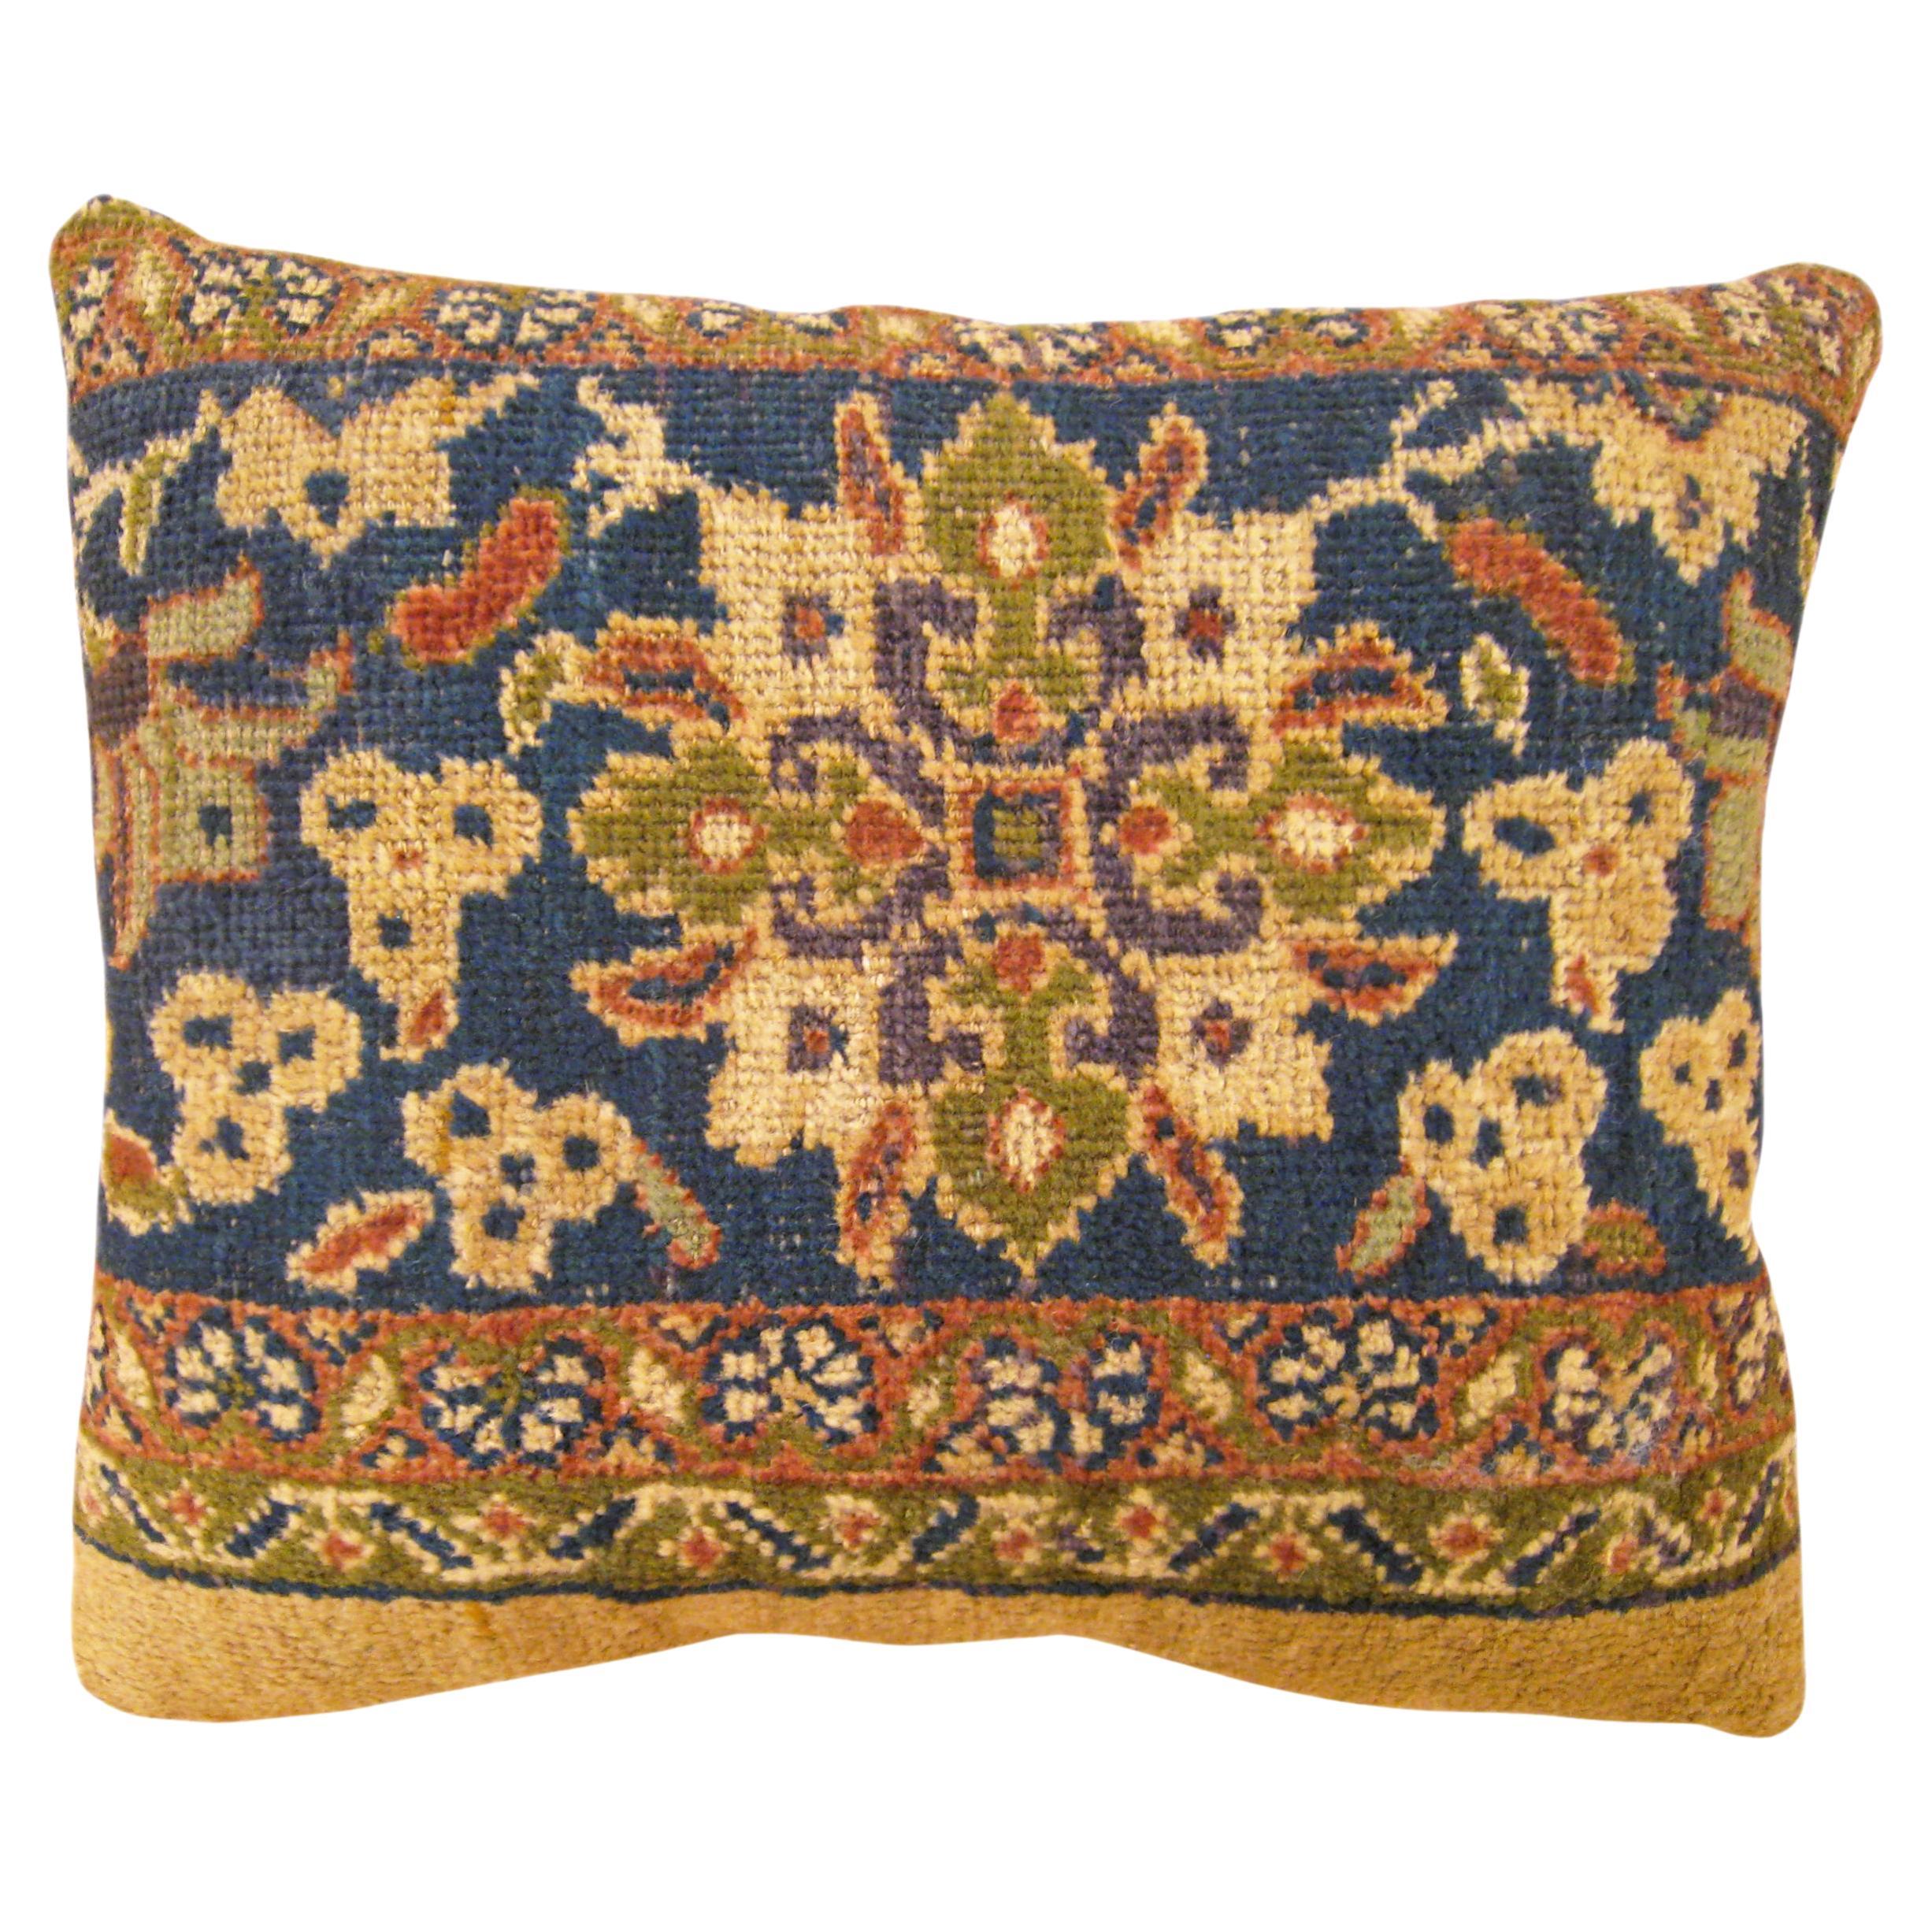 Decorative Antique Persian Sultanabad Carpet Pillow with Floral Elements For Sale